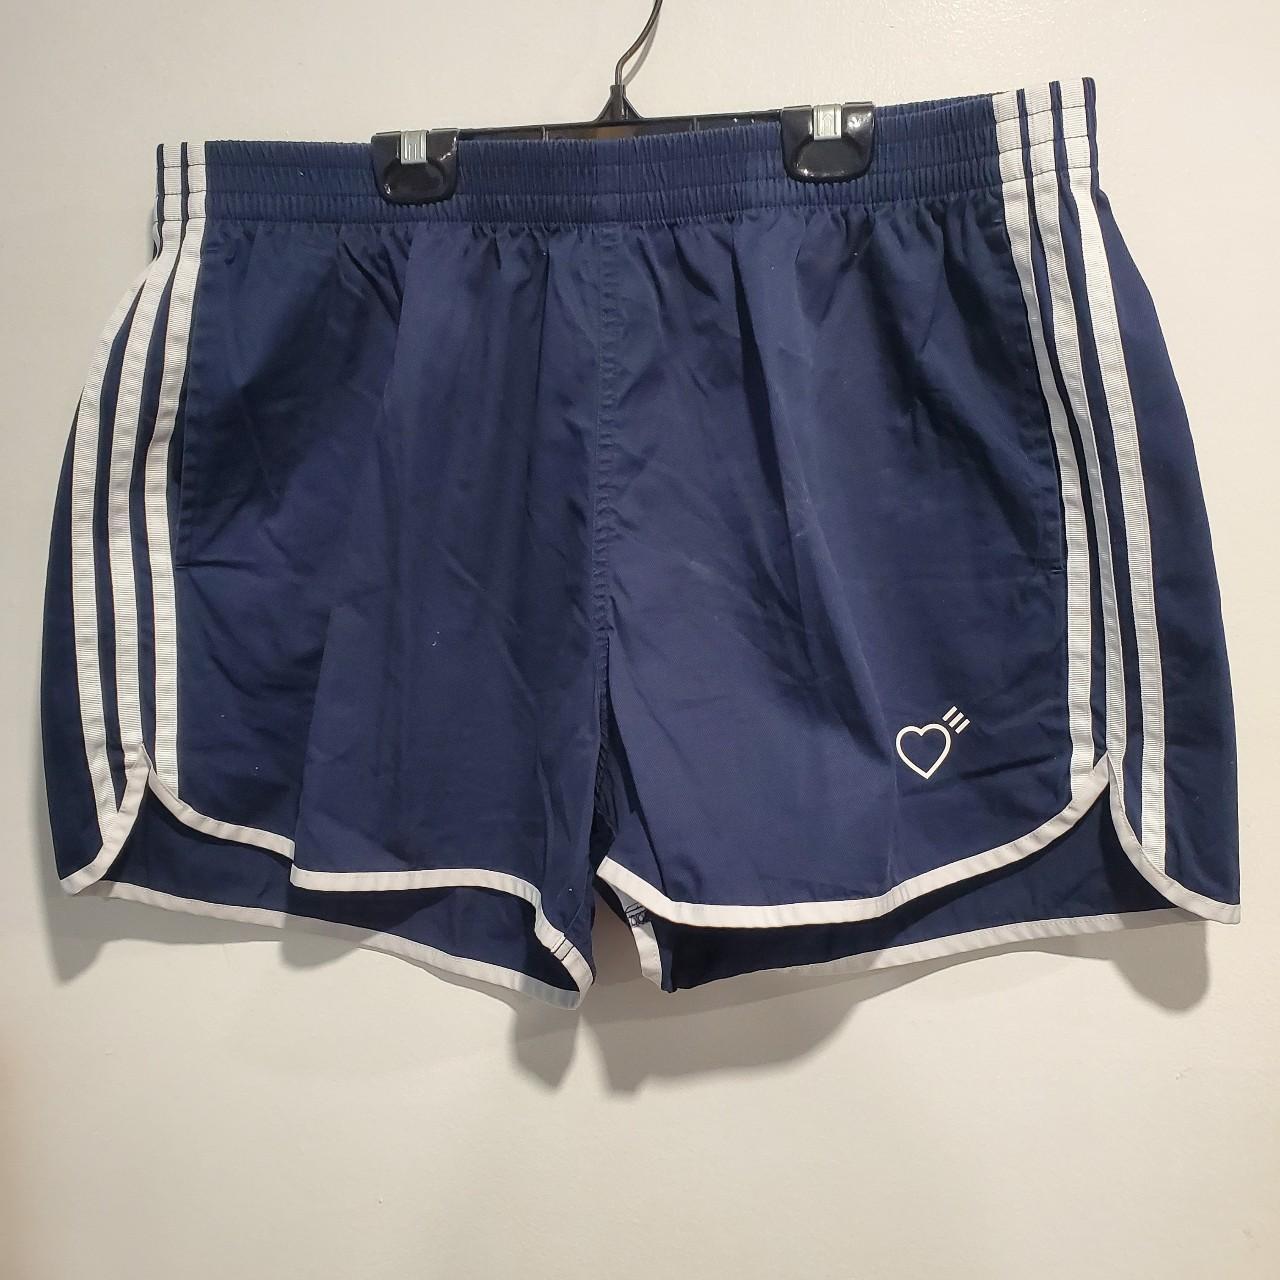 Human Made Men's Blue and White Shorts